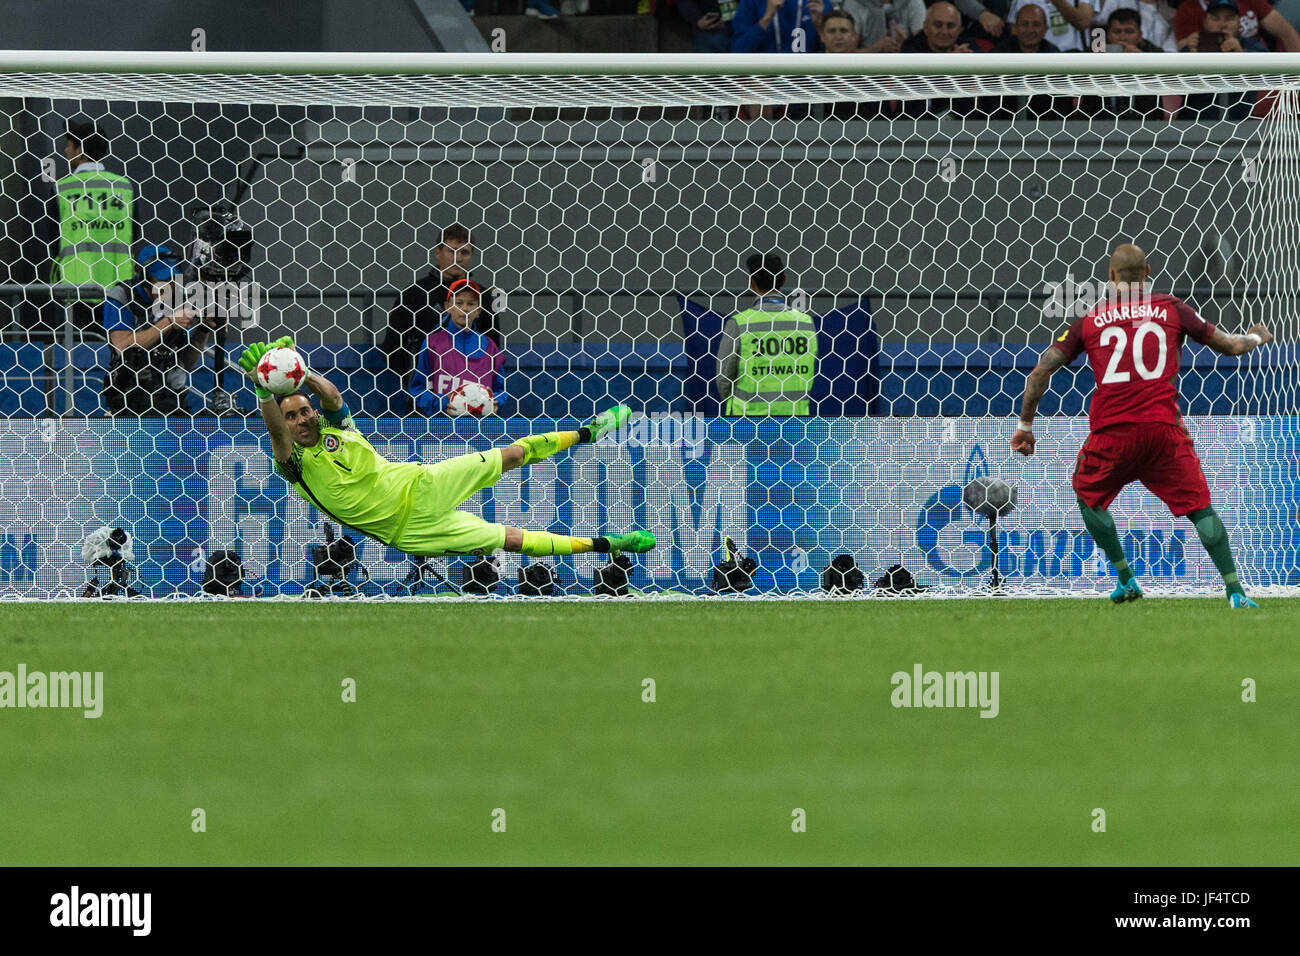 Kazan, Russia. 28th June, 2017. Goalkeeper Claudio Bravo (L) of Chile dives to save the penalty shot from Ricardo Quaresma of Portugal during the FIFA Confederations Cup 2017 semifinal match in Kazan, Russia, June 28, 2017. Credit: Bai Xueqi/Xinhua/Alamy Live News Stock Photo